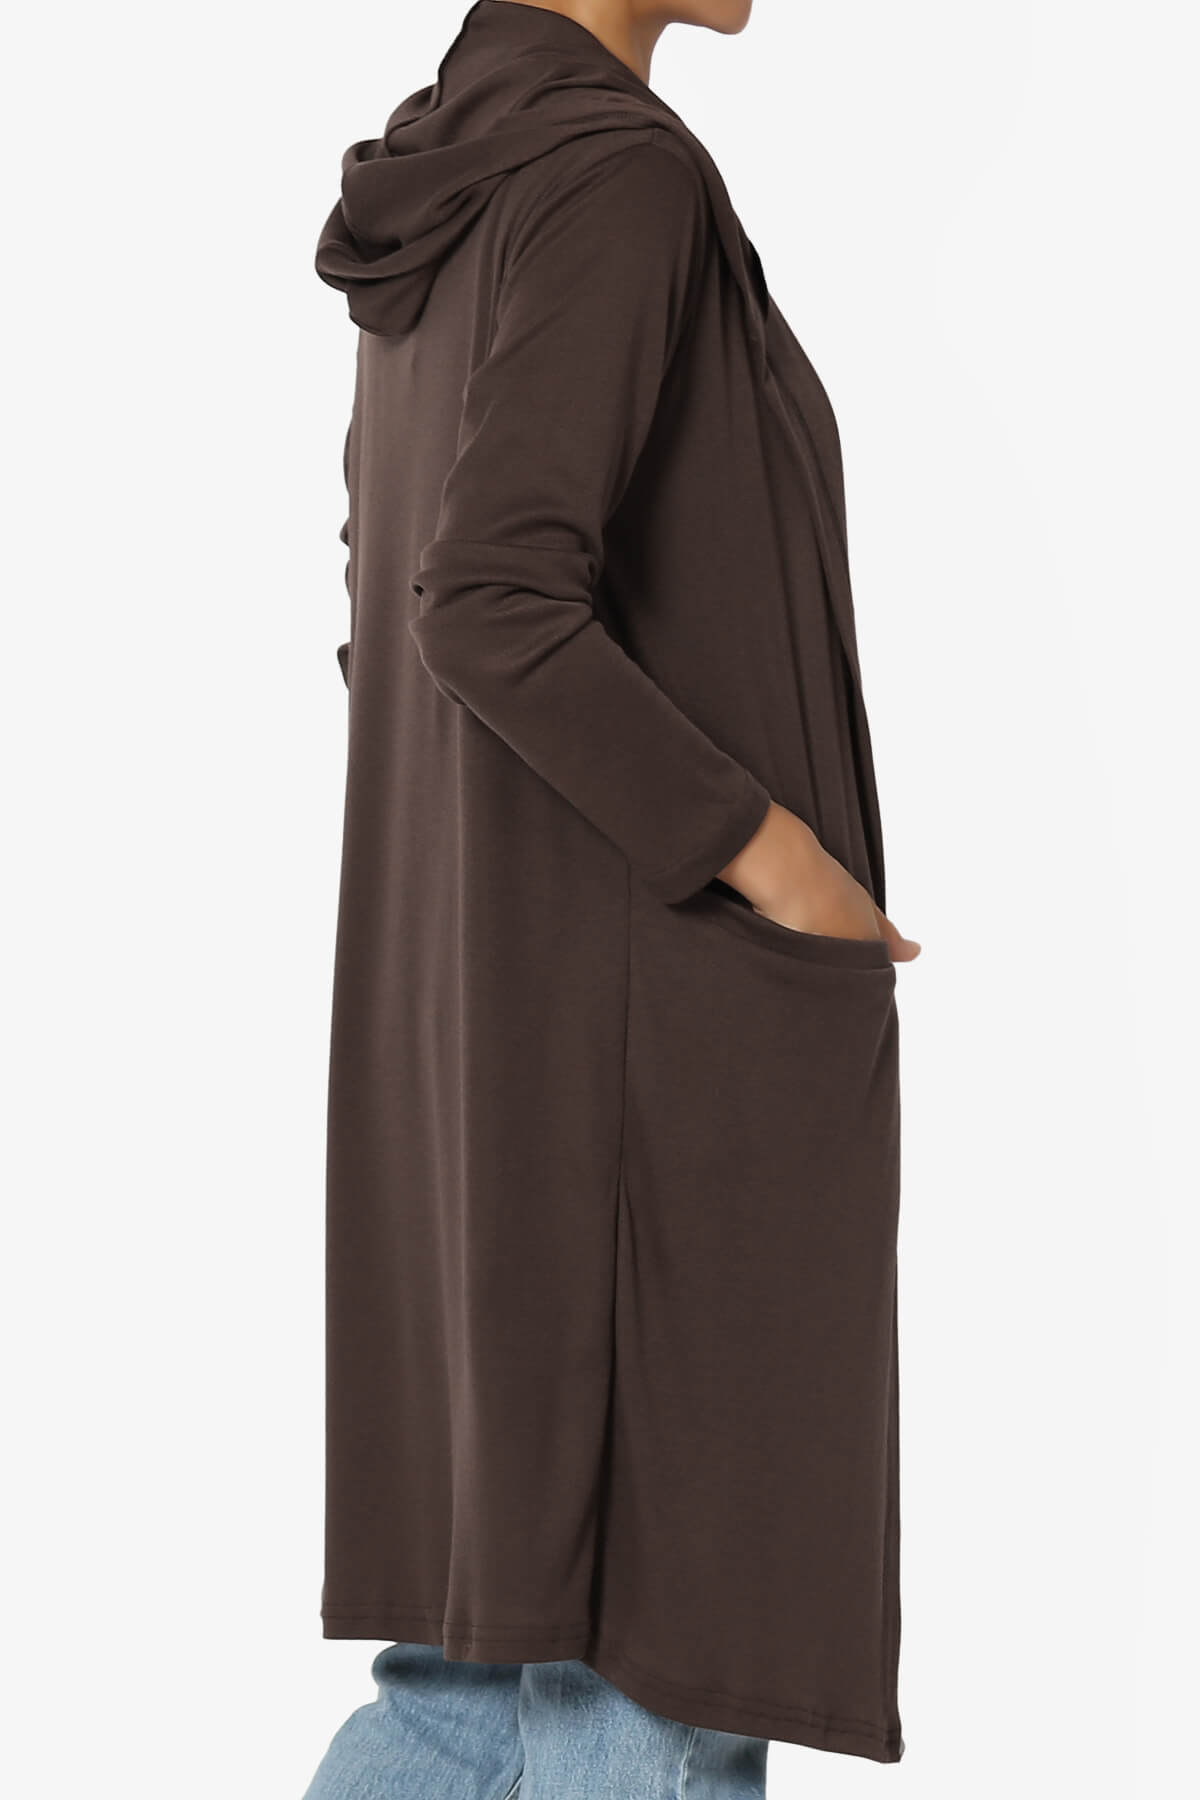 Nataly Open Front Hooded Long Cardigan BROWN_4